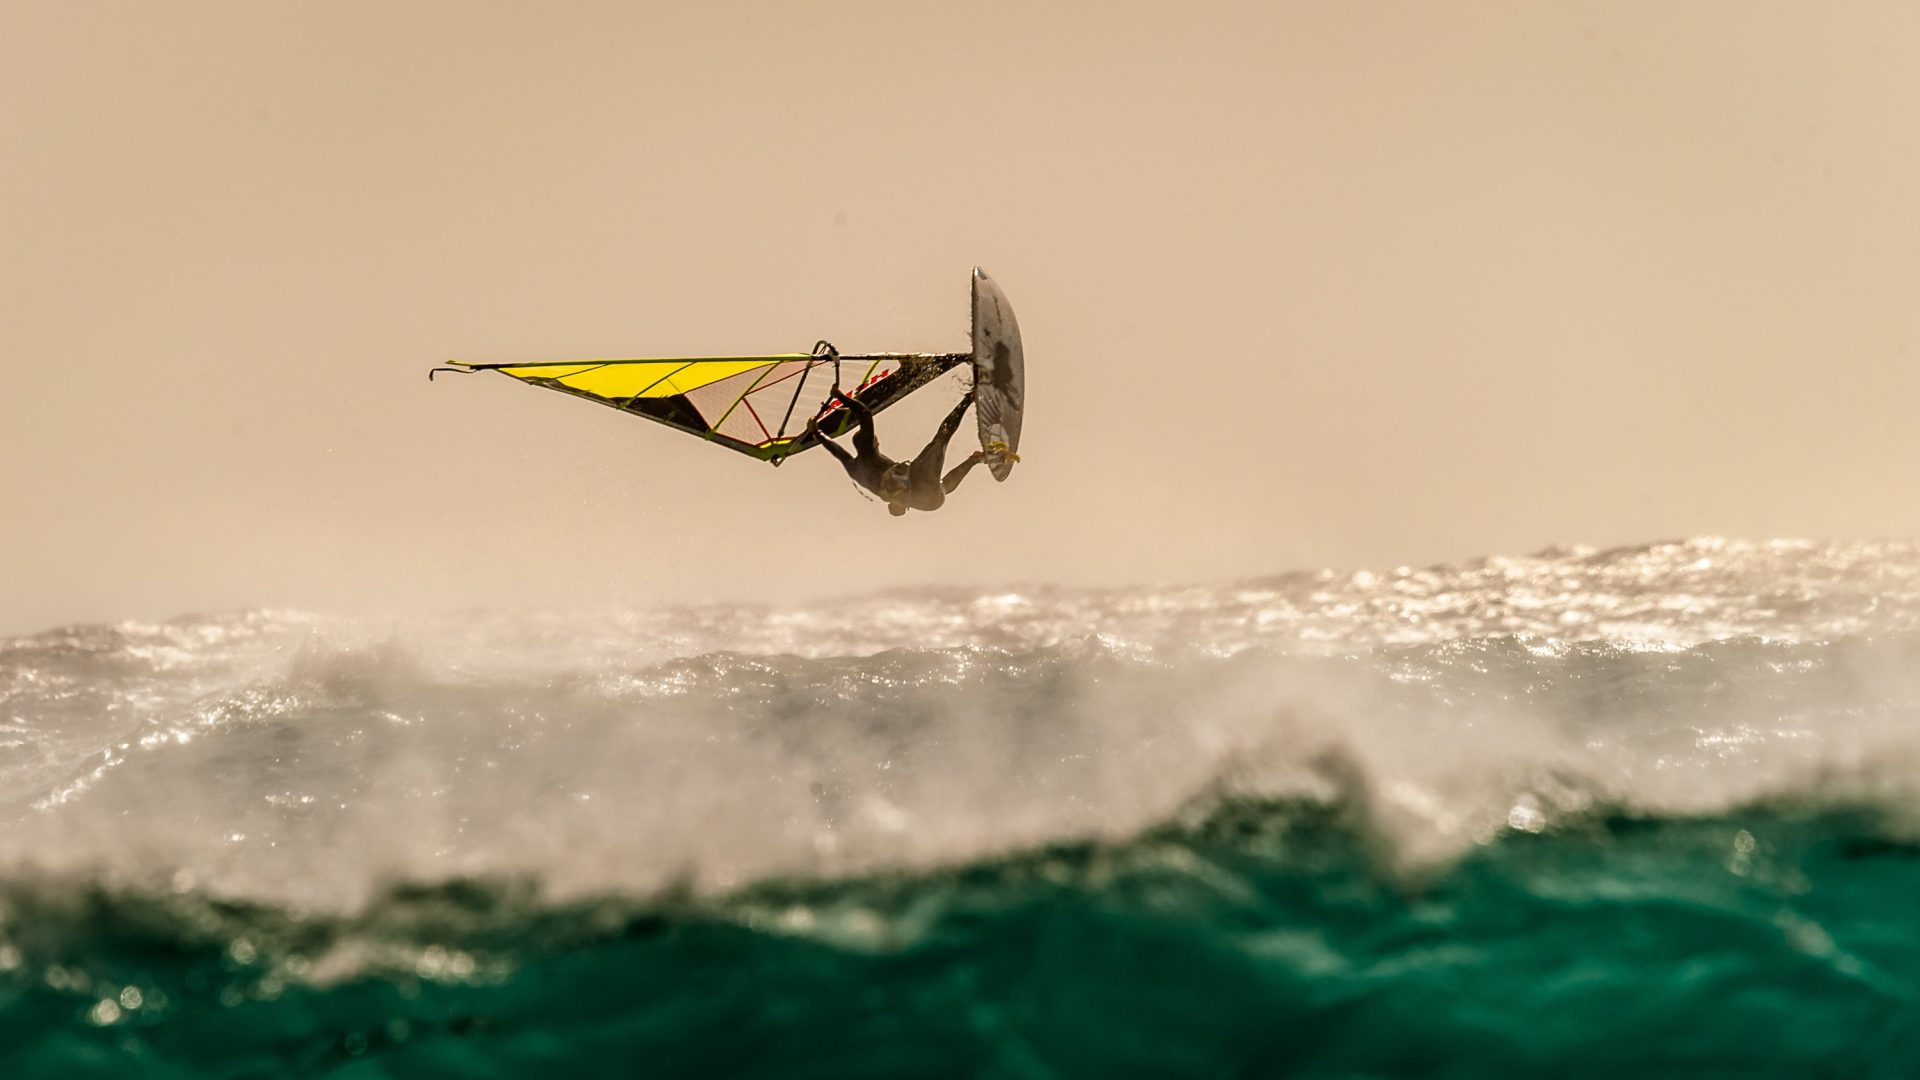 A windsurfer takes to the air above the water.